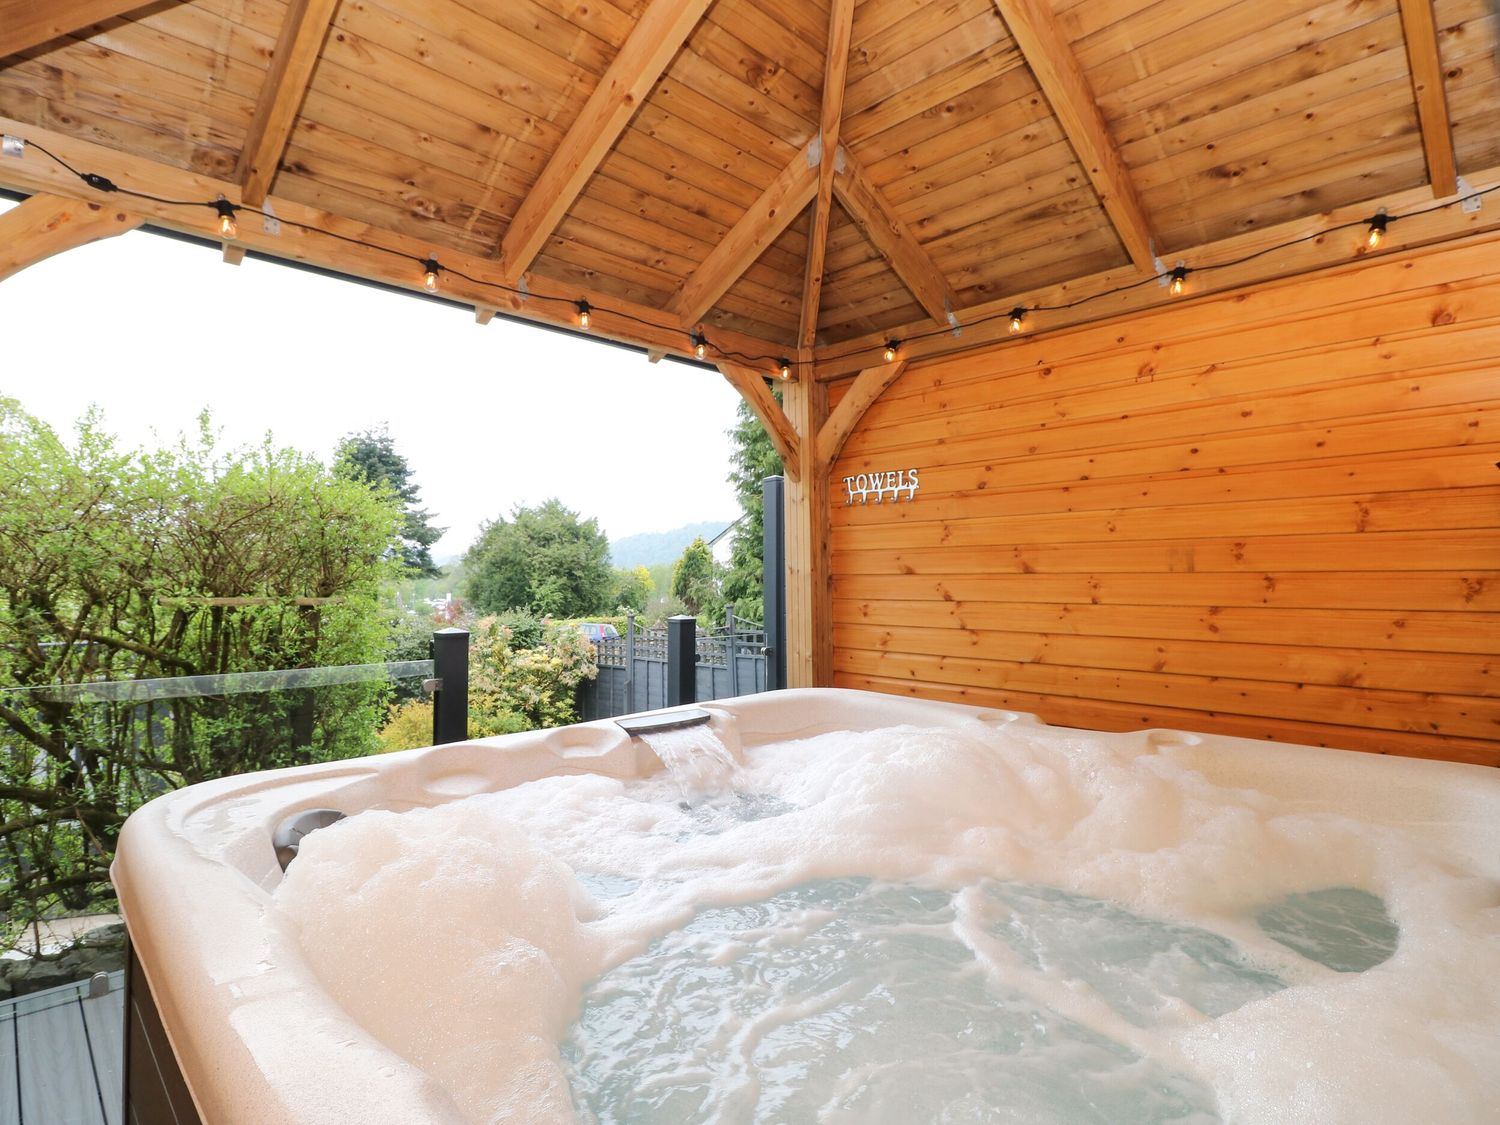 Briars Lea, Bowness-On-Windermere in Cumbria. Pet-friendly. WiFi. Hot tub. Views of Lake Windermere.